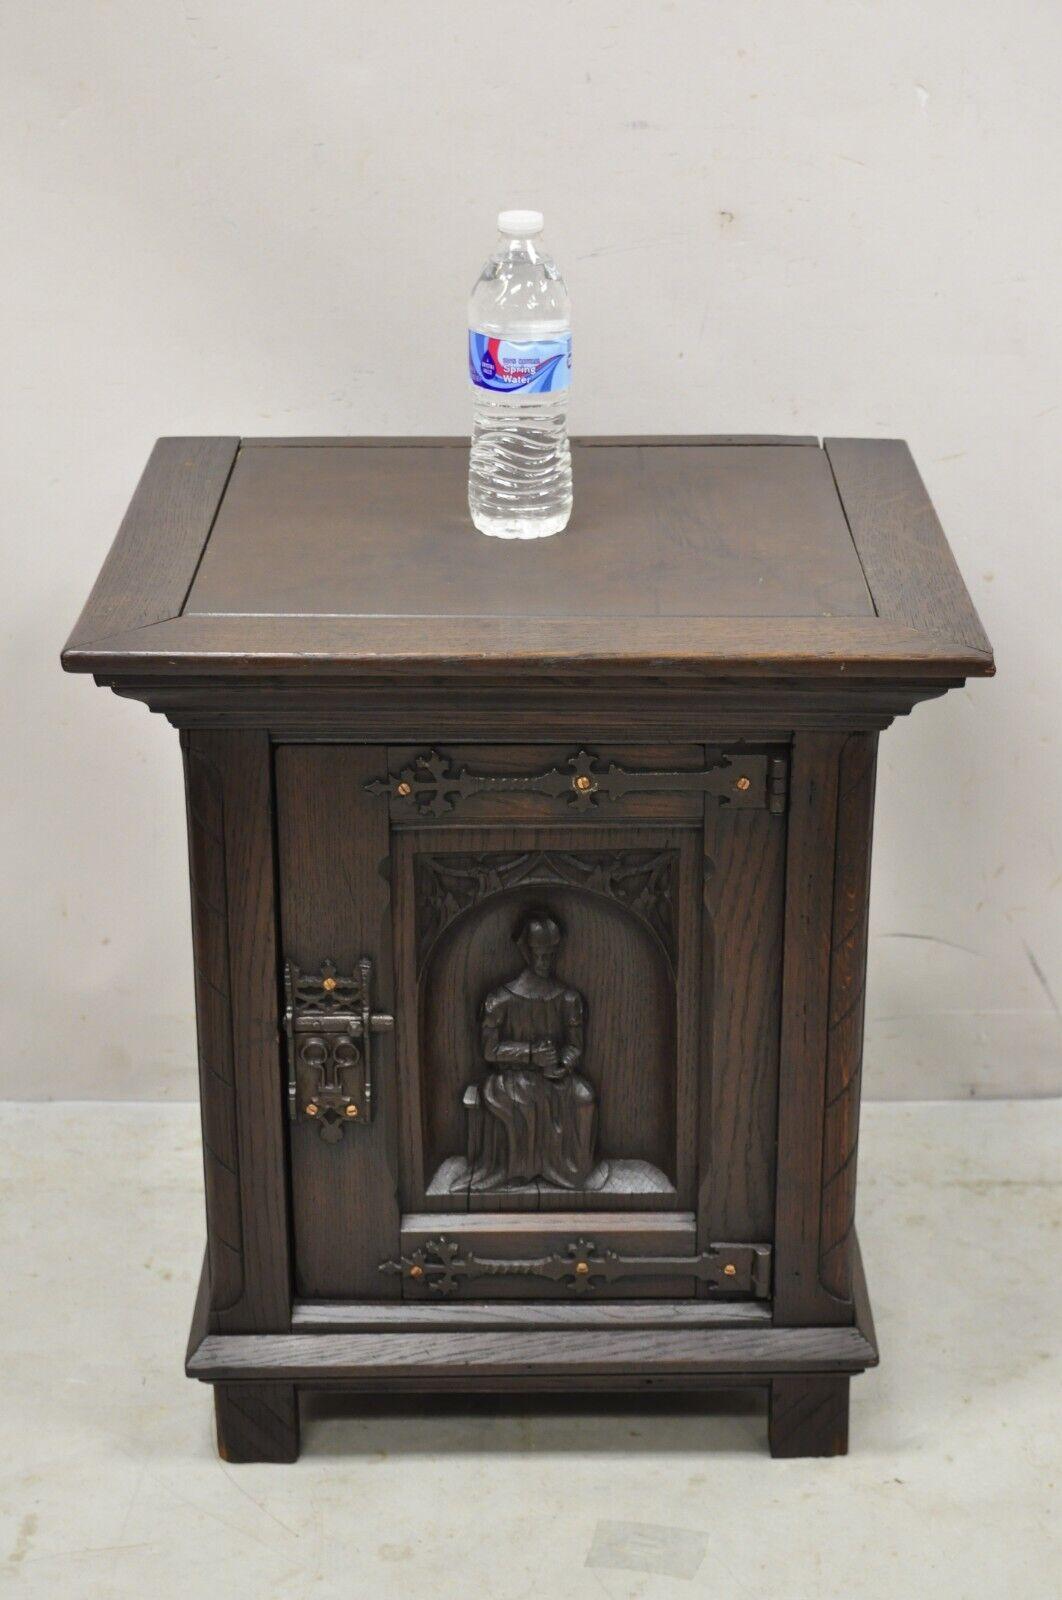 Antique Gothic Renaissance revival oak wood figural carved low cabinet. Item features relief carved figure to door, drape carved wooden sides, inset masonite board top (not original), solid wood construction, beautiful wood grain, nicely carved